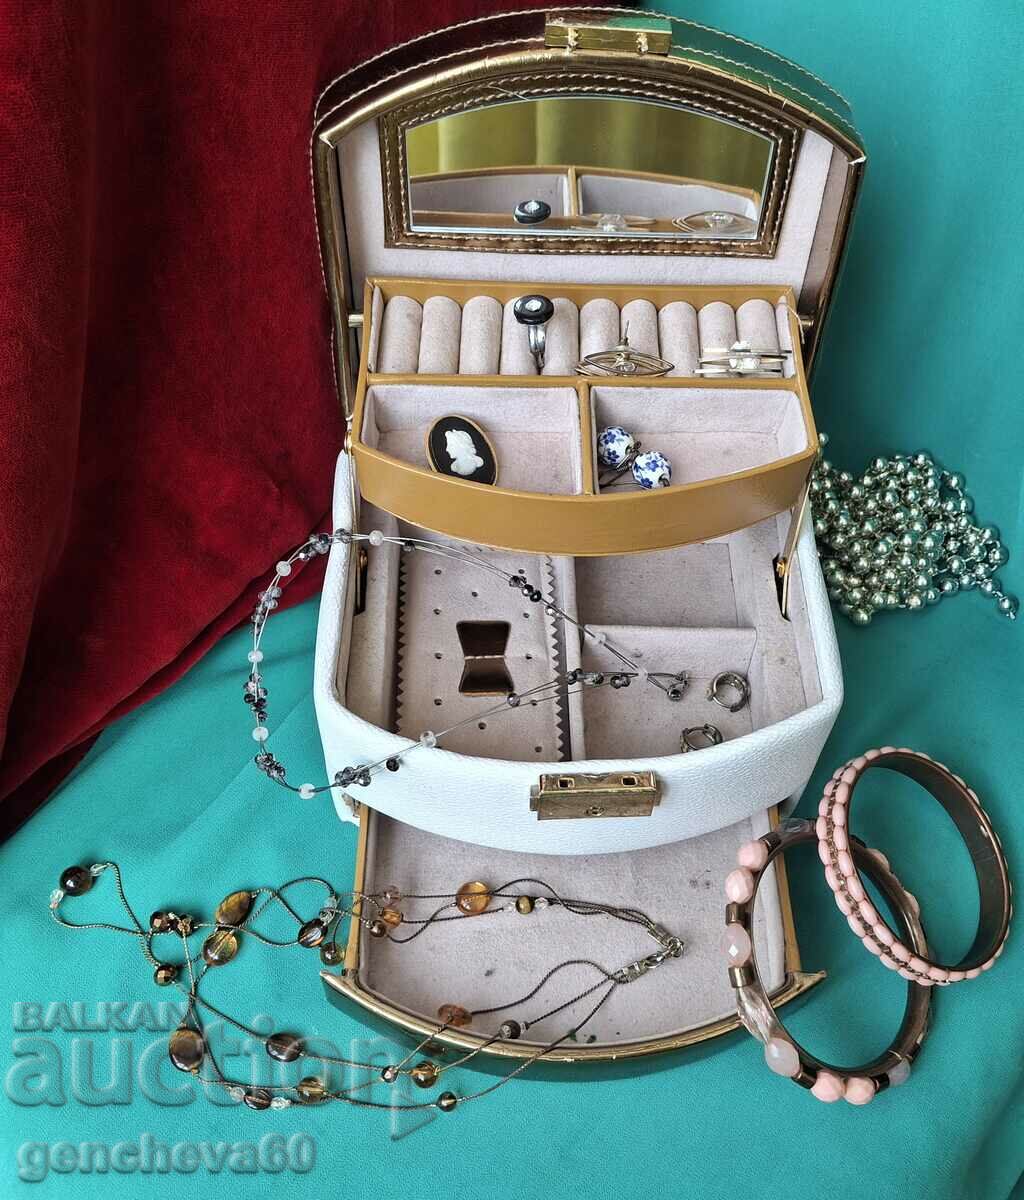 A suitcase with various jewelry